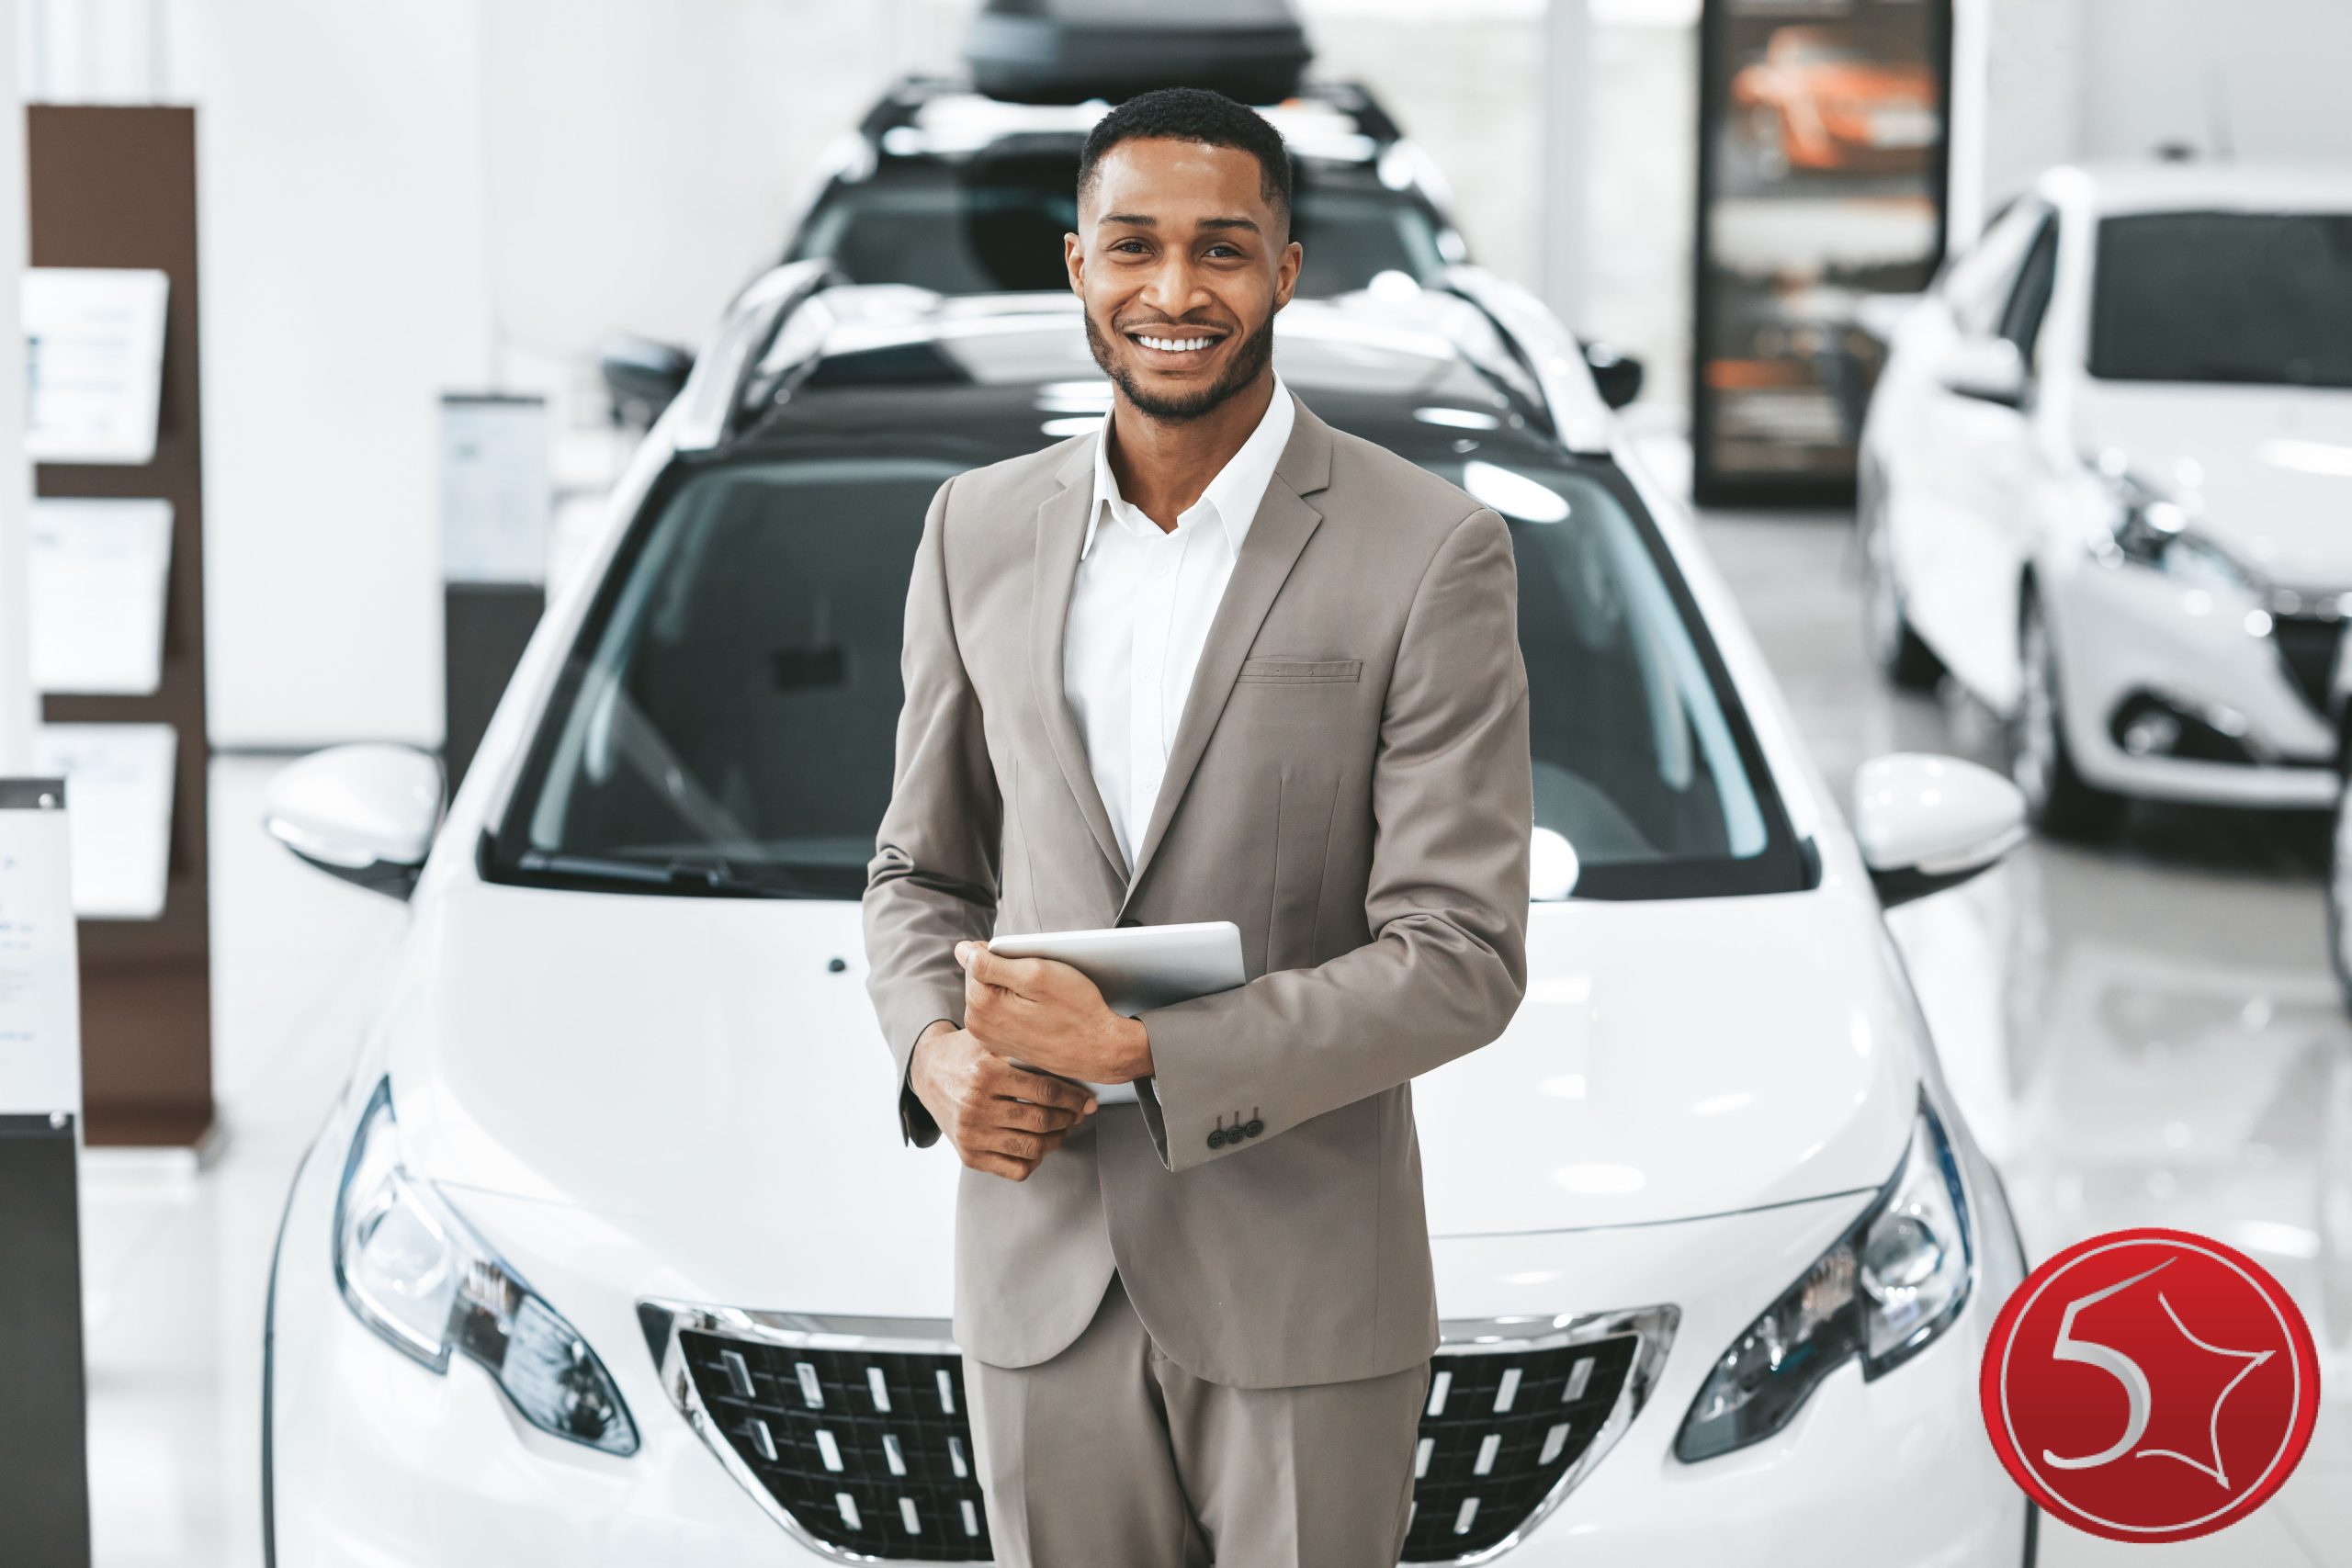 Helpful Used Car Buying Tips with Poor Credit All Drivers Can Use